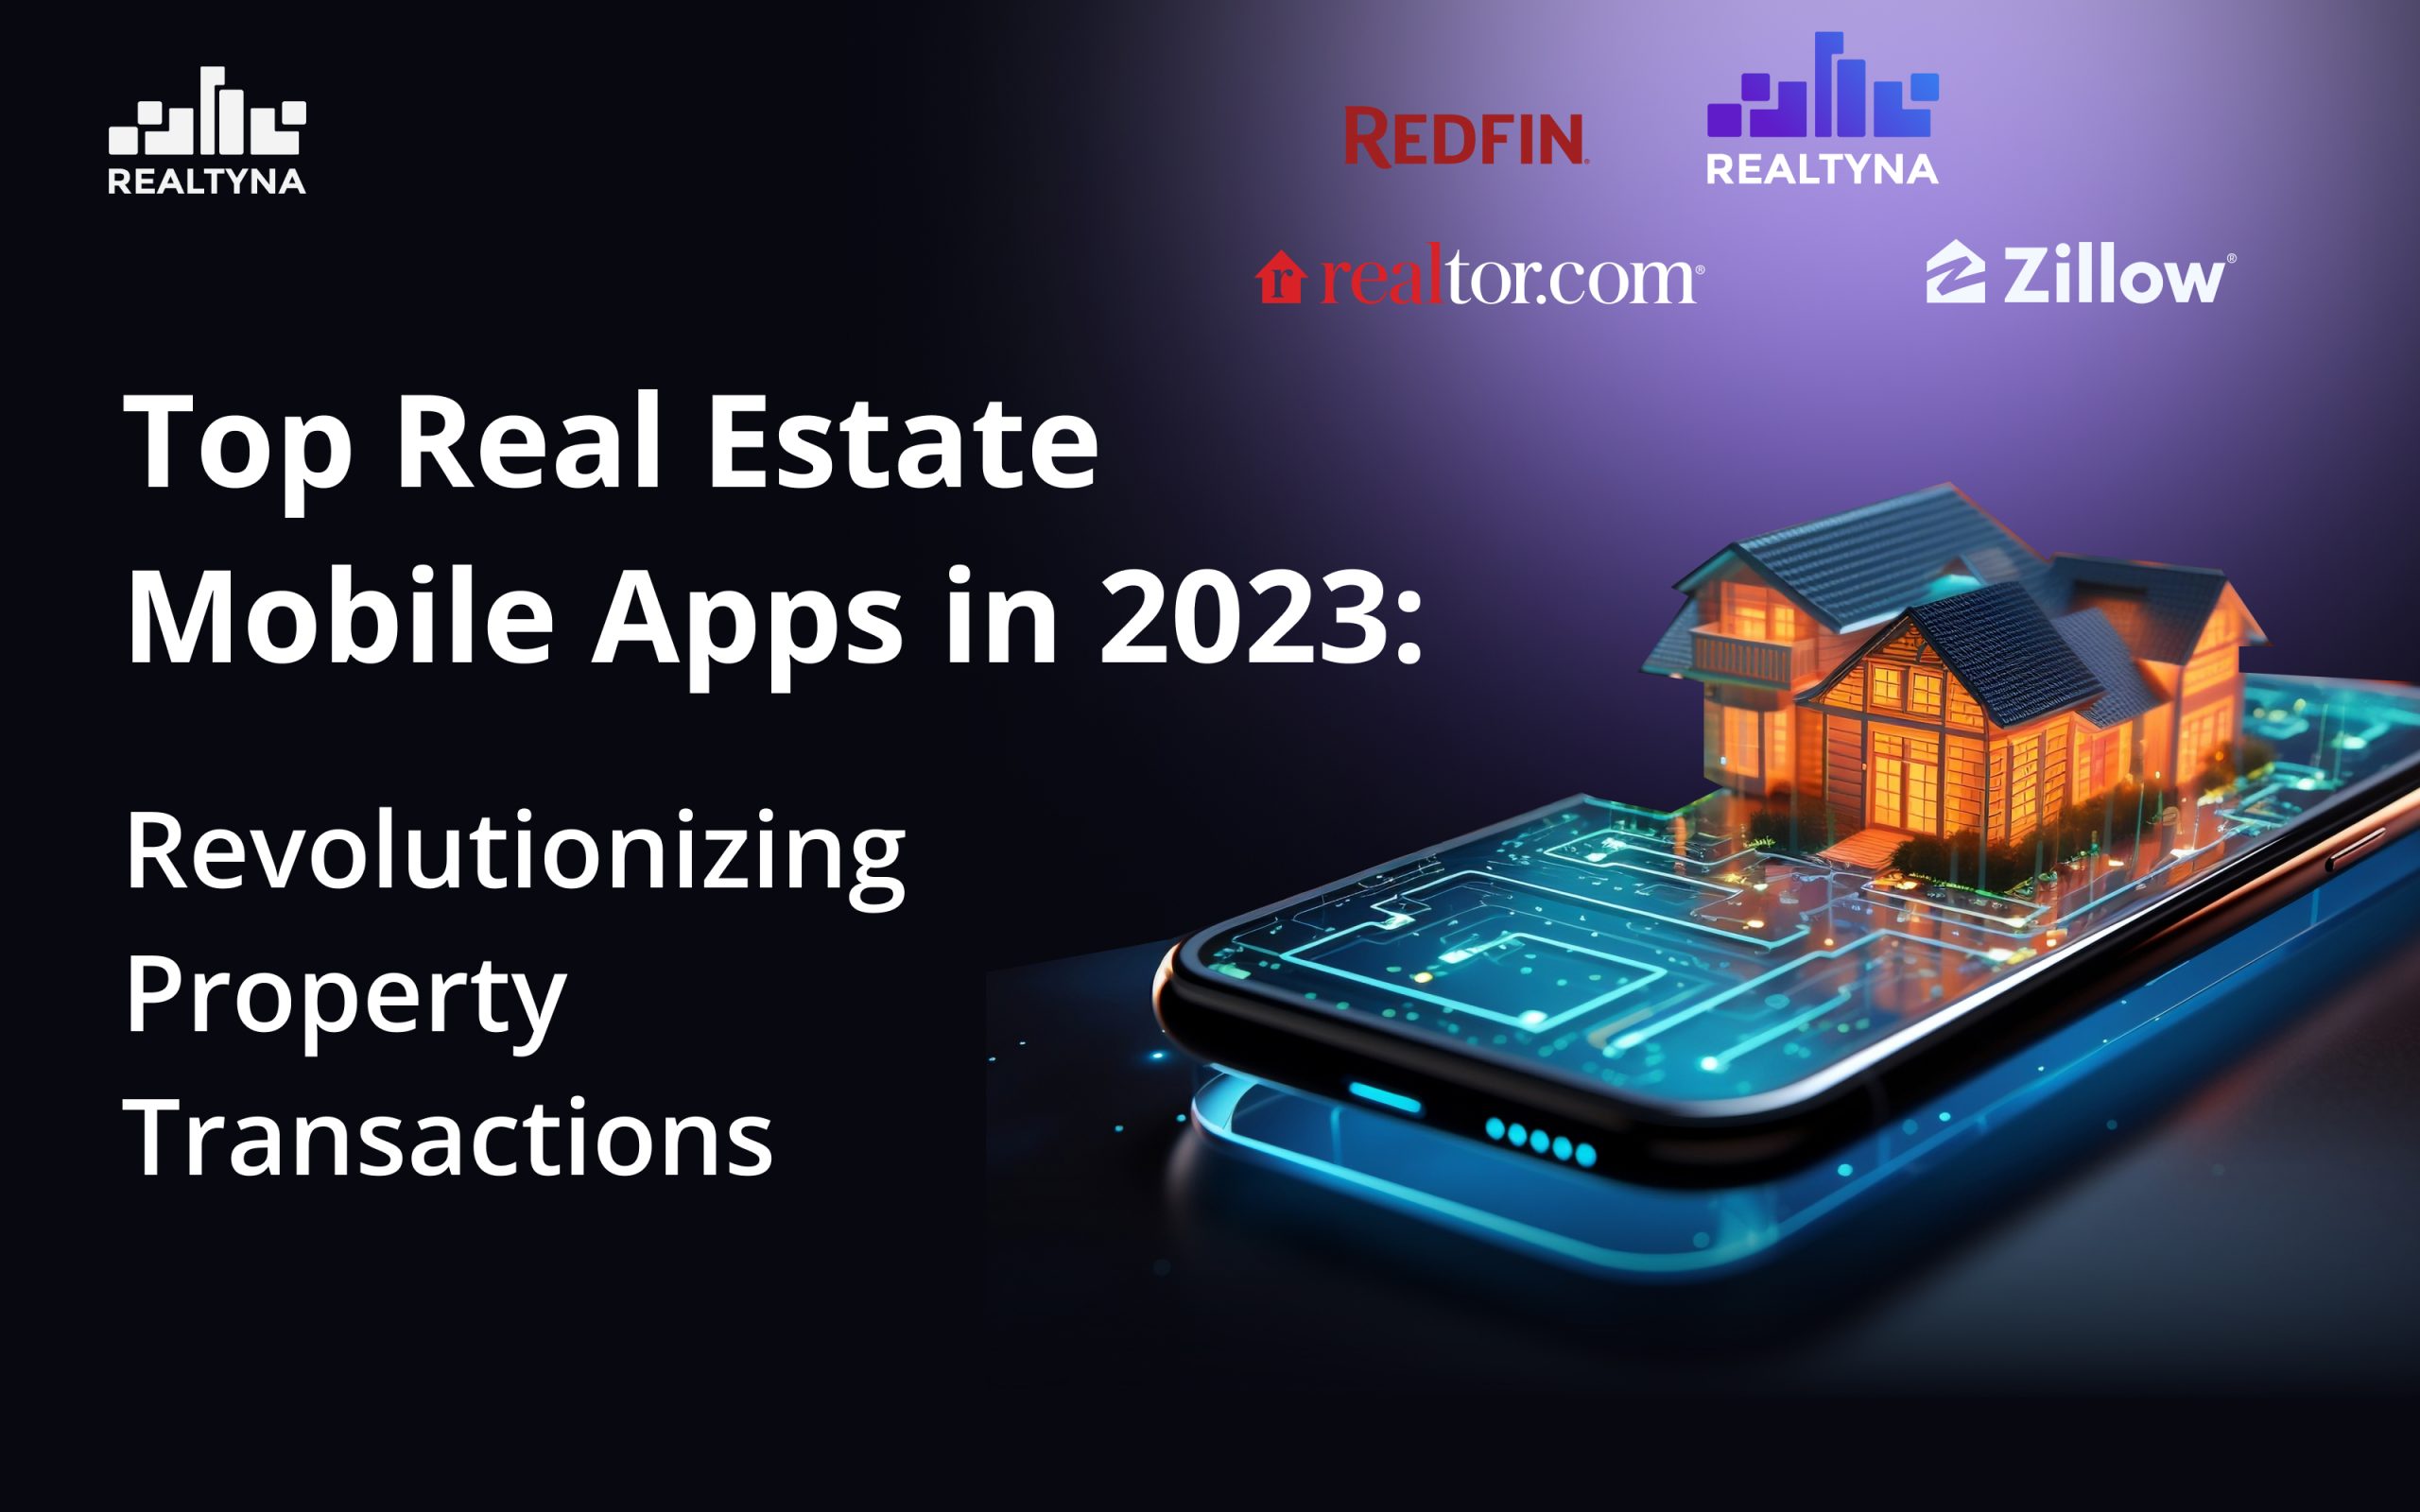 Top Real Estate Mobile Apps in 2023: Revolutionizing Property Transactions